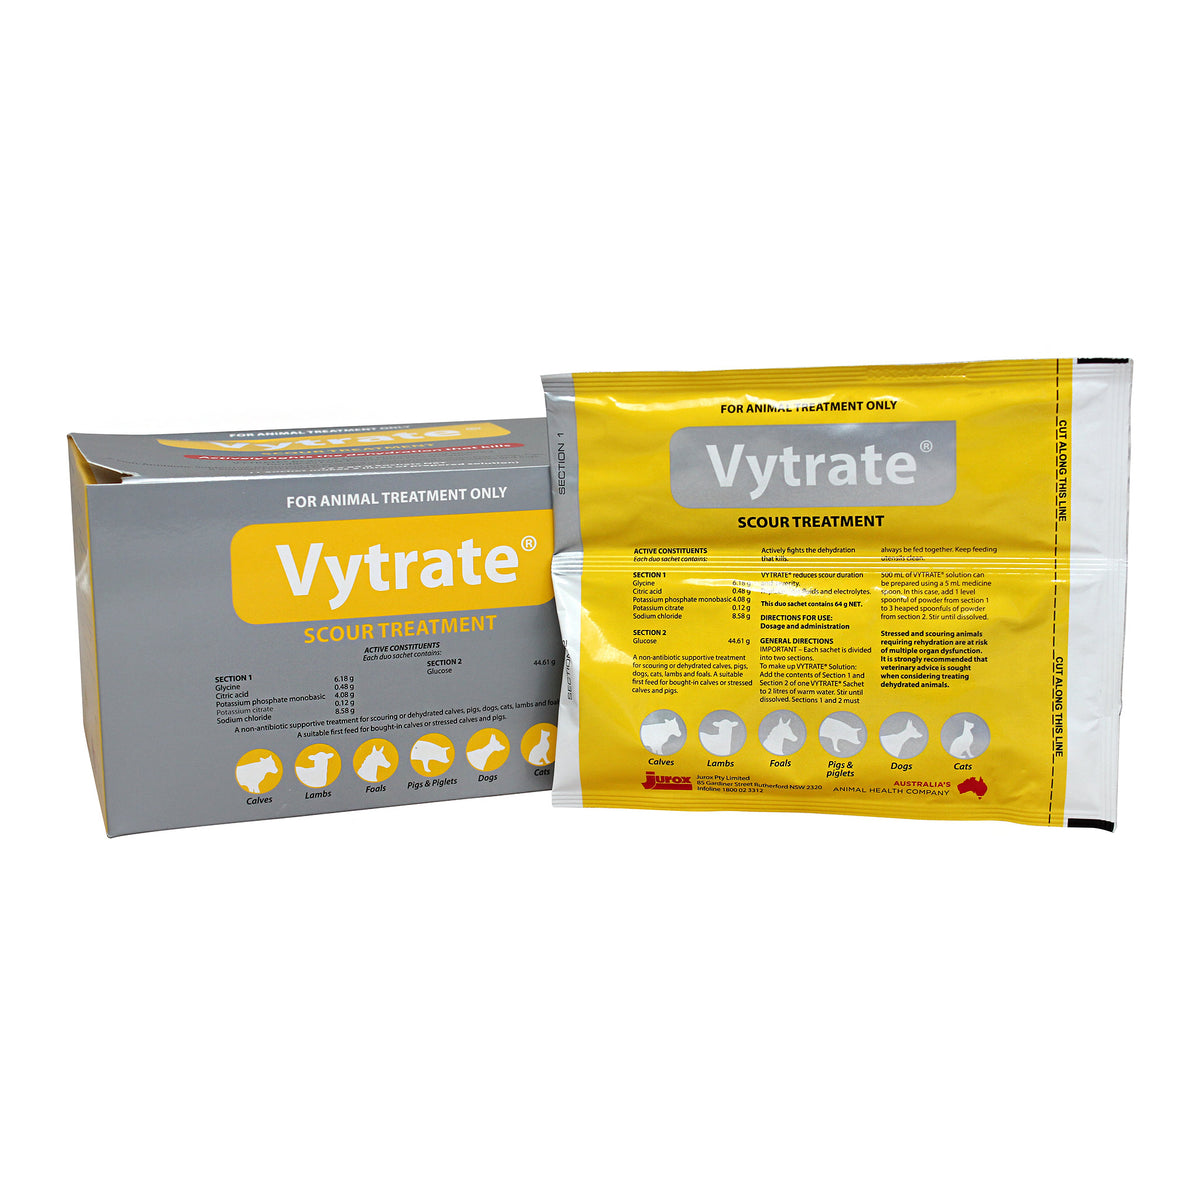 Vytrate Sachets 64g Box of 12